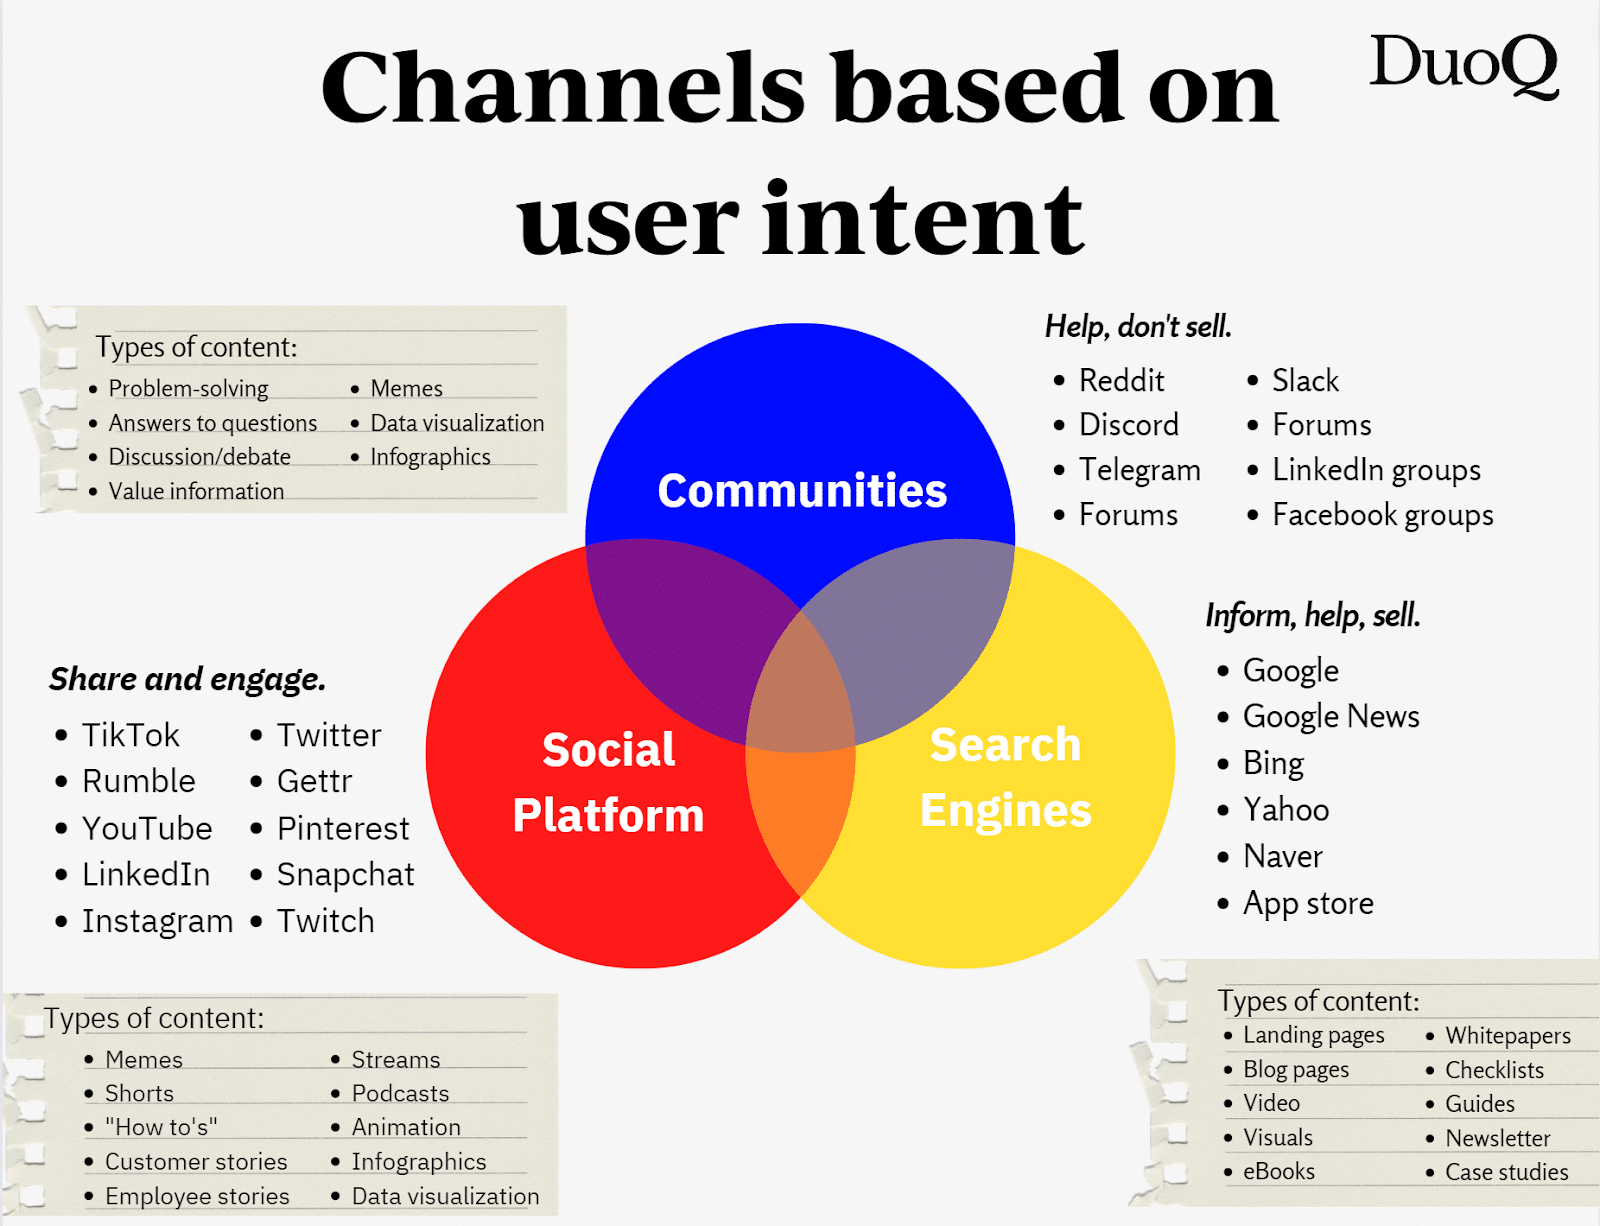 Choosing Channels Based on User Intent